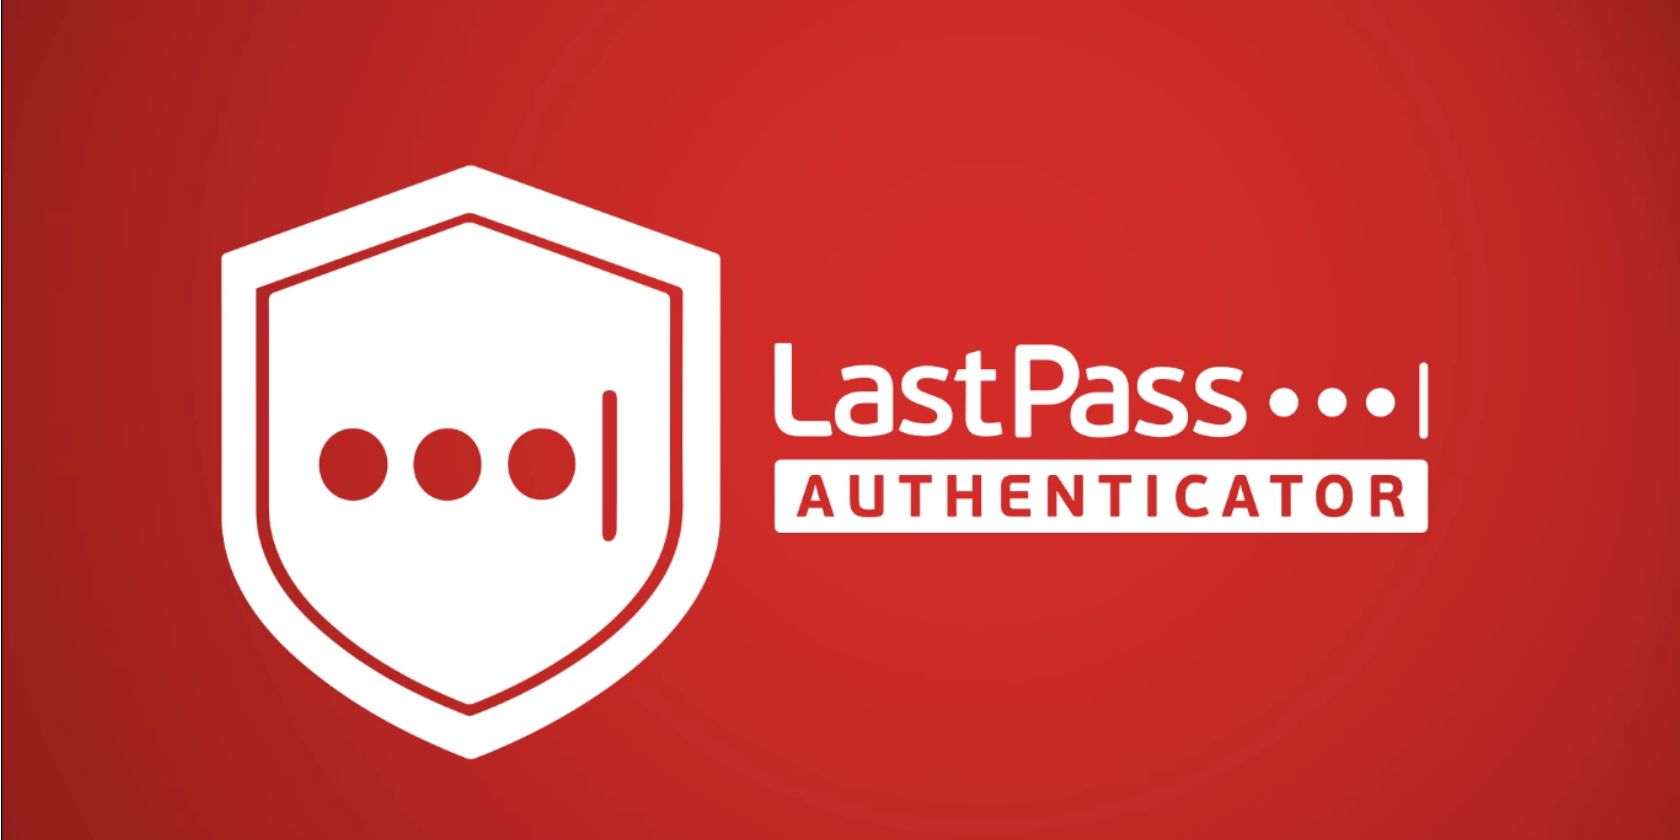 does lastpass support support u2f